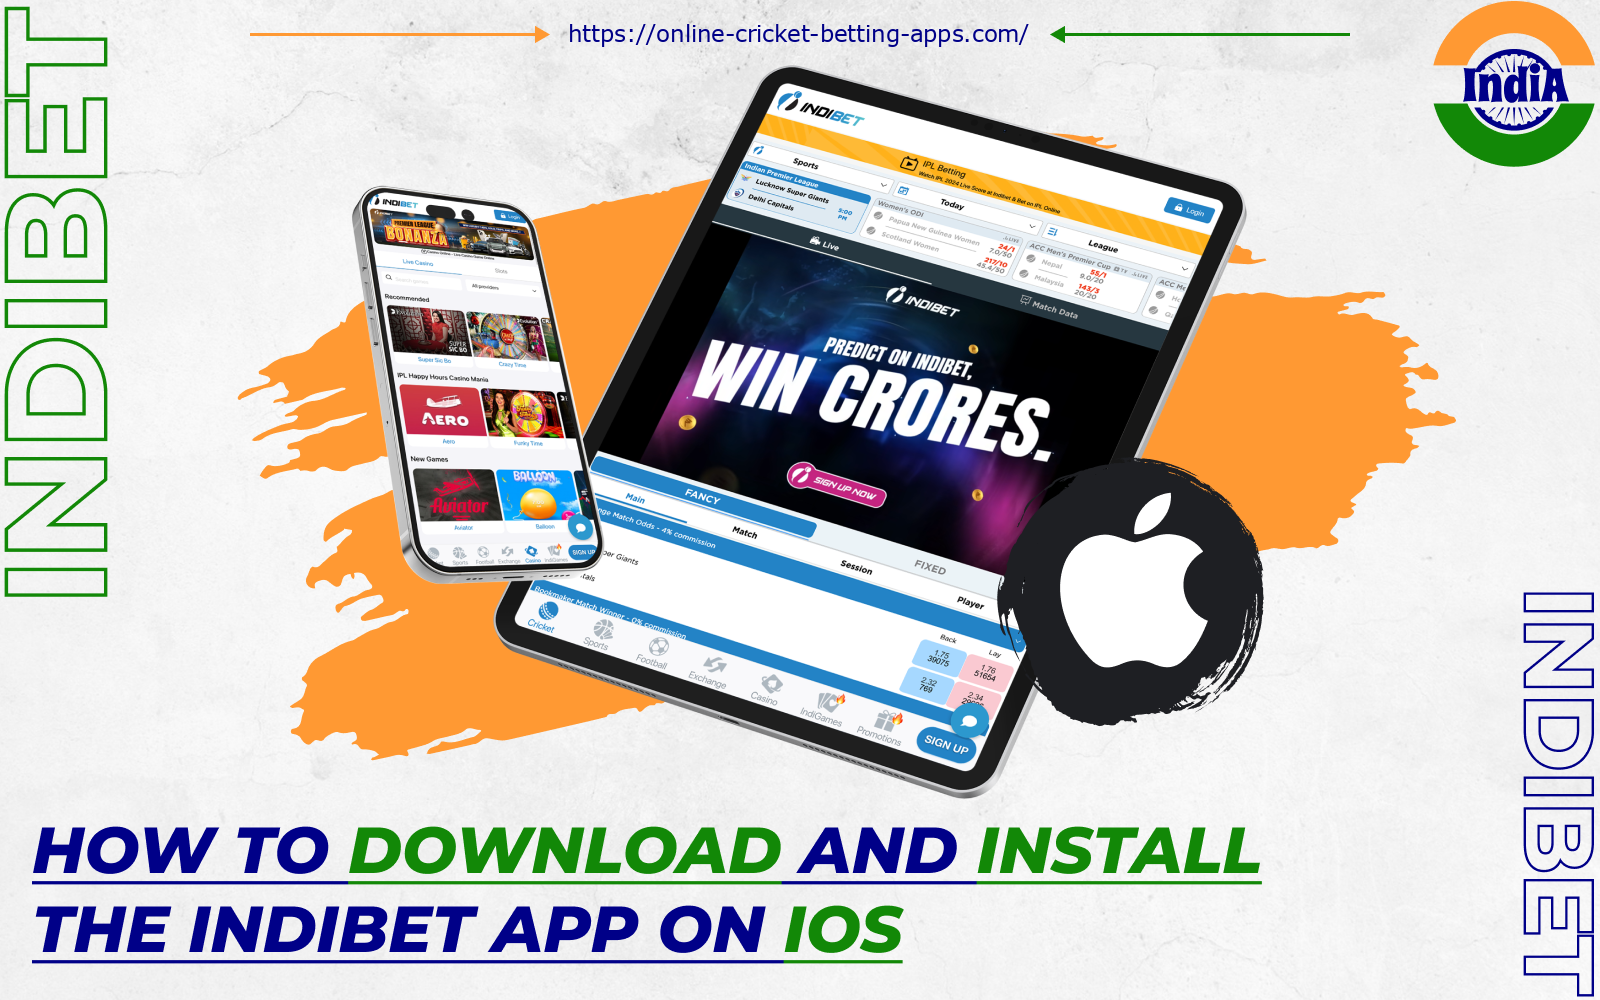 Bettors from India can easily install Indinet on their iOS smartphone and place bets at any convenient time